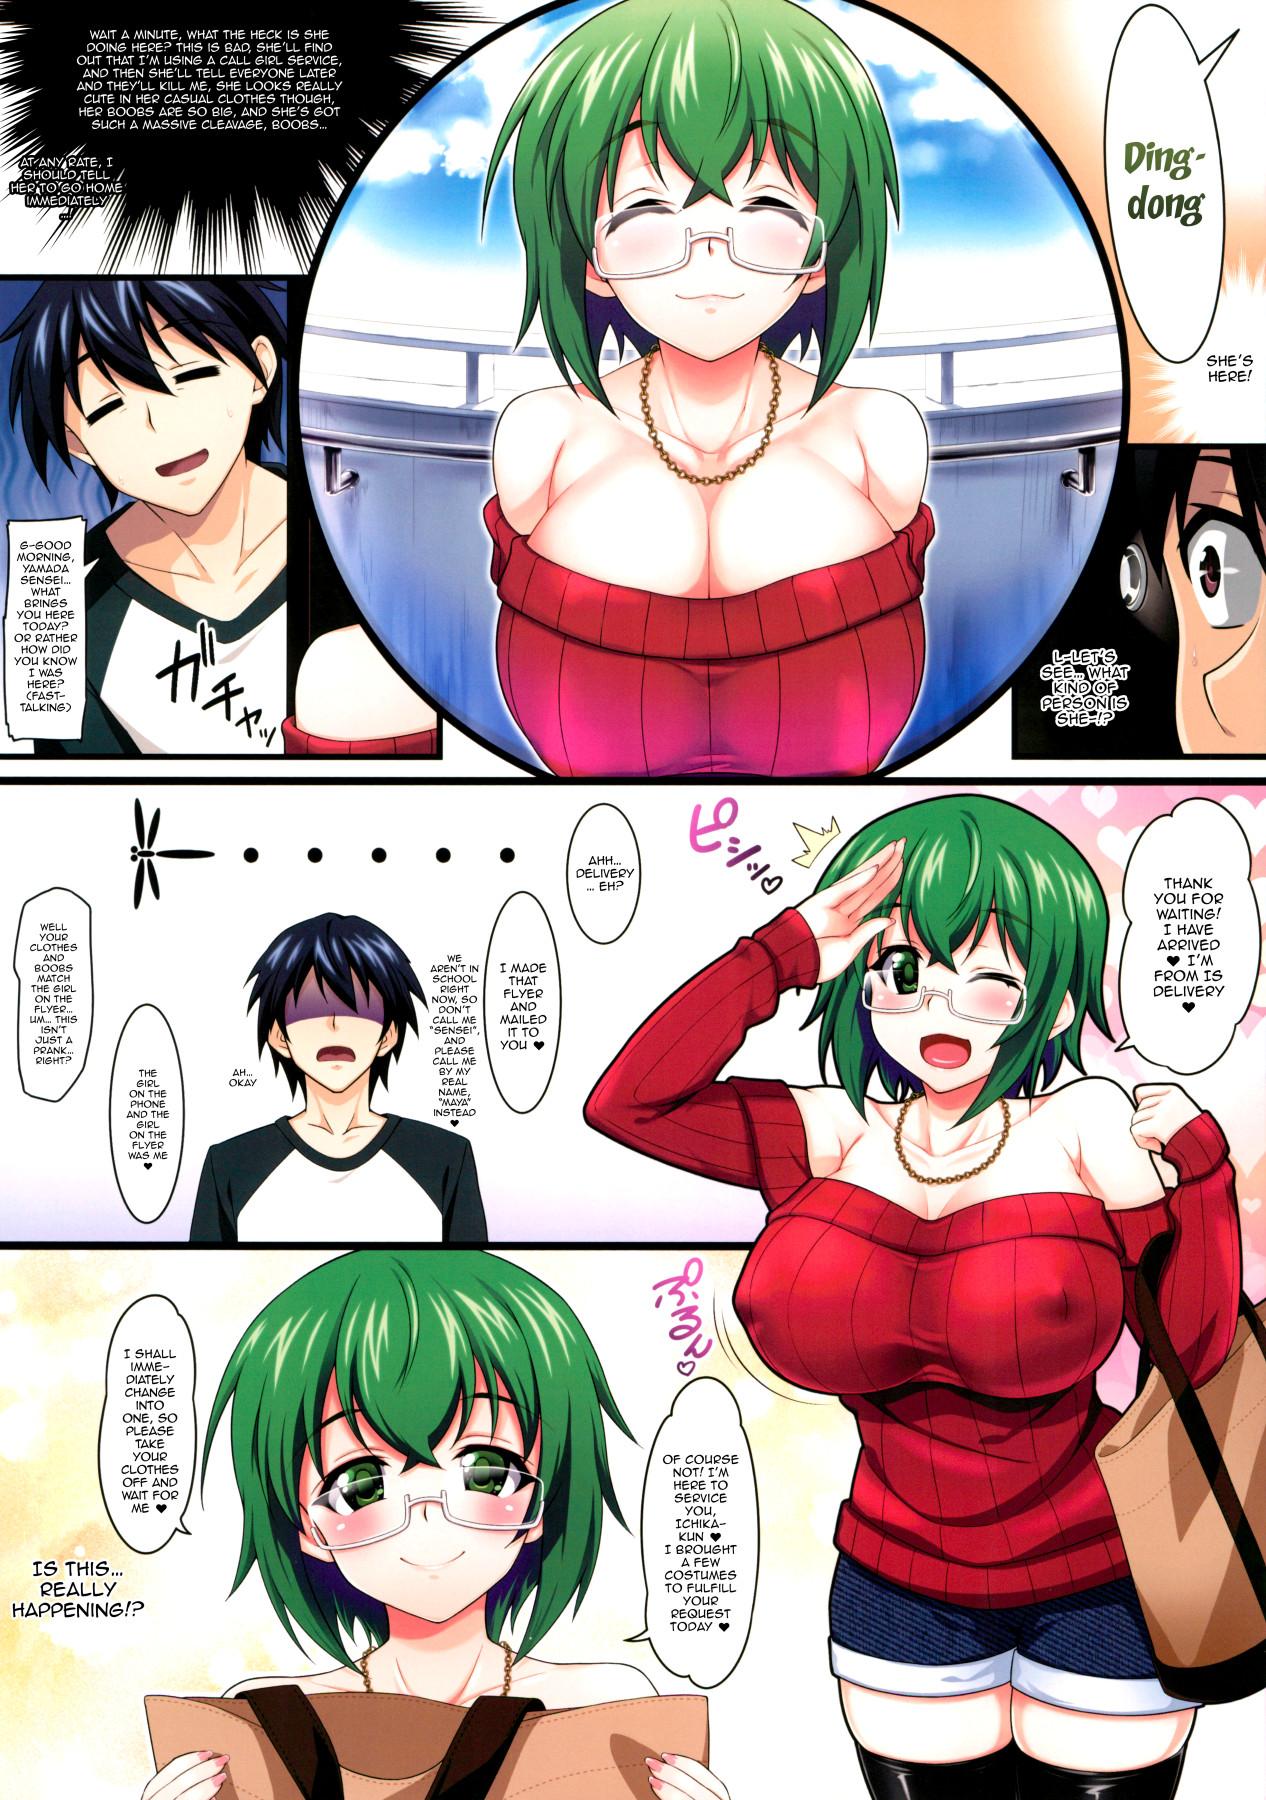 Dick maya kore is delivery - Infinite stratos Real Sex - Page 3